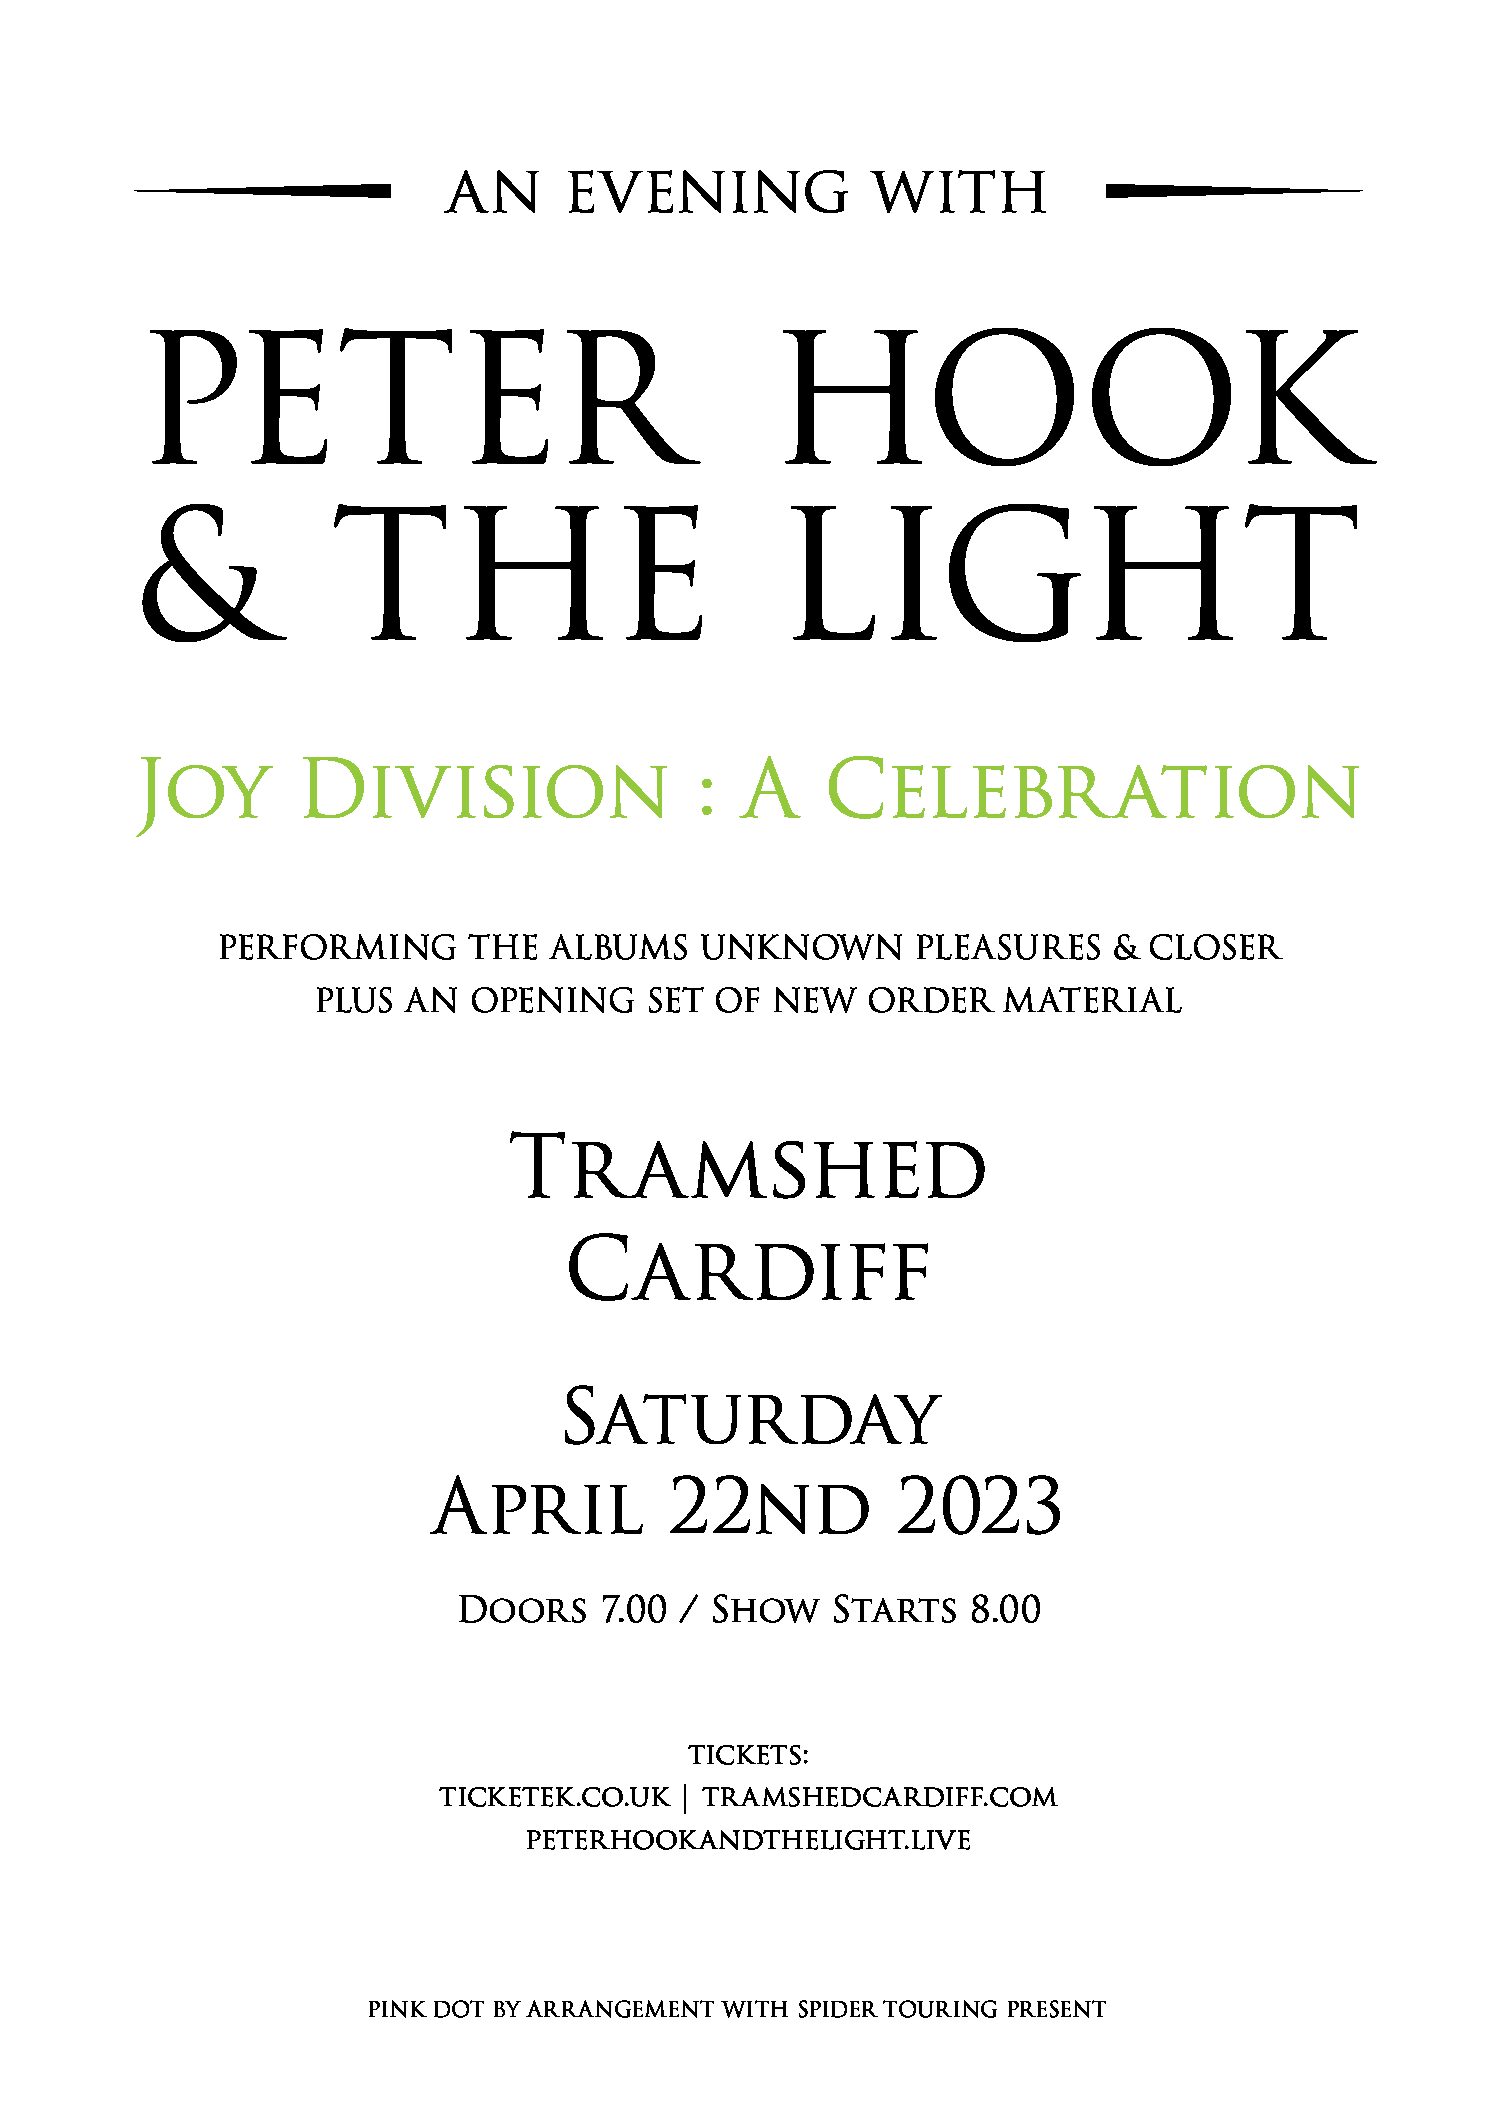 SOLD OUT – PETER HOOK & THE LIGHT JOY DIVISION